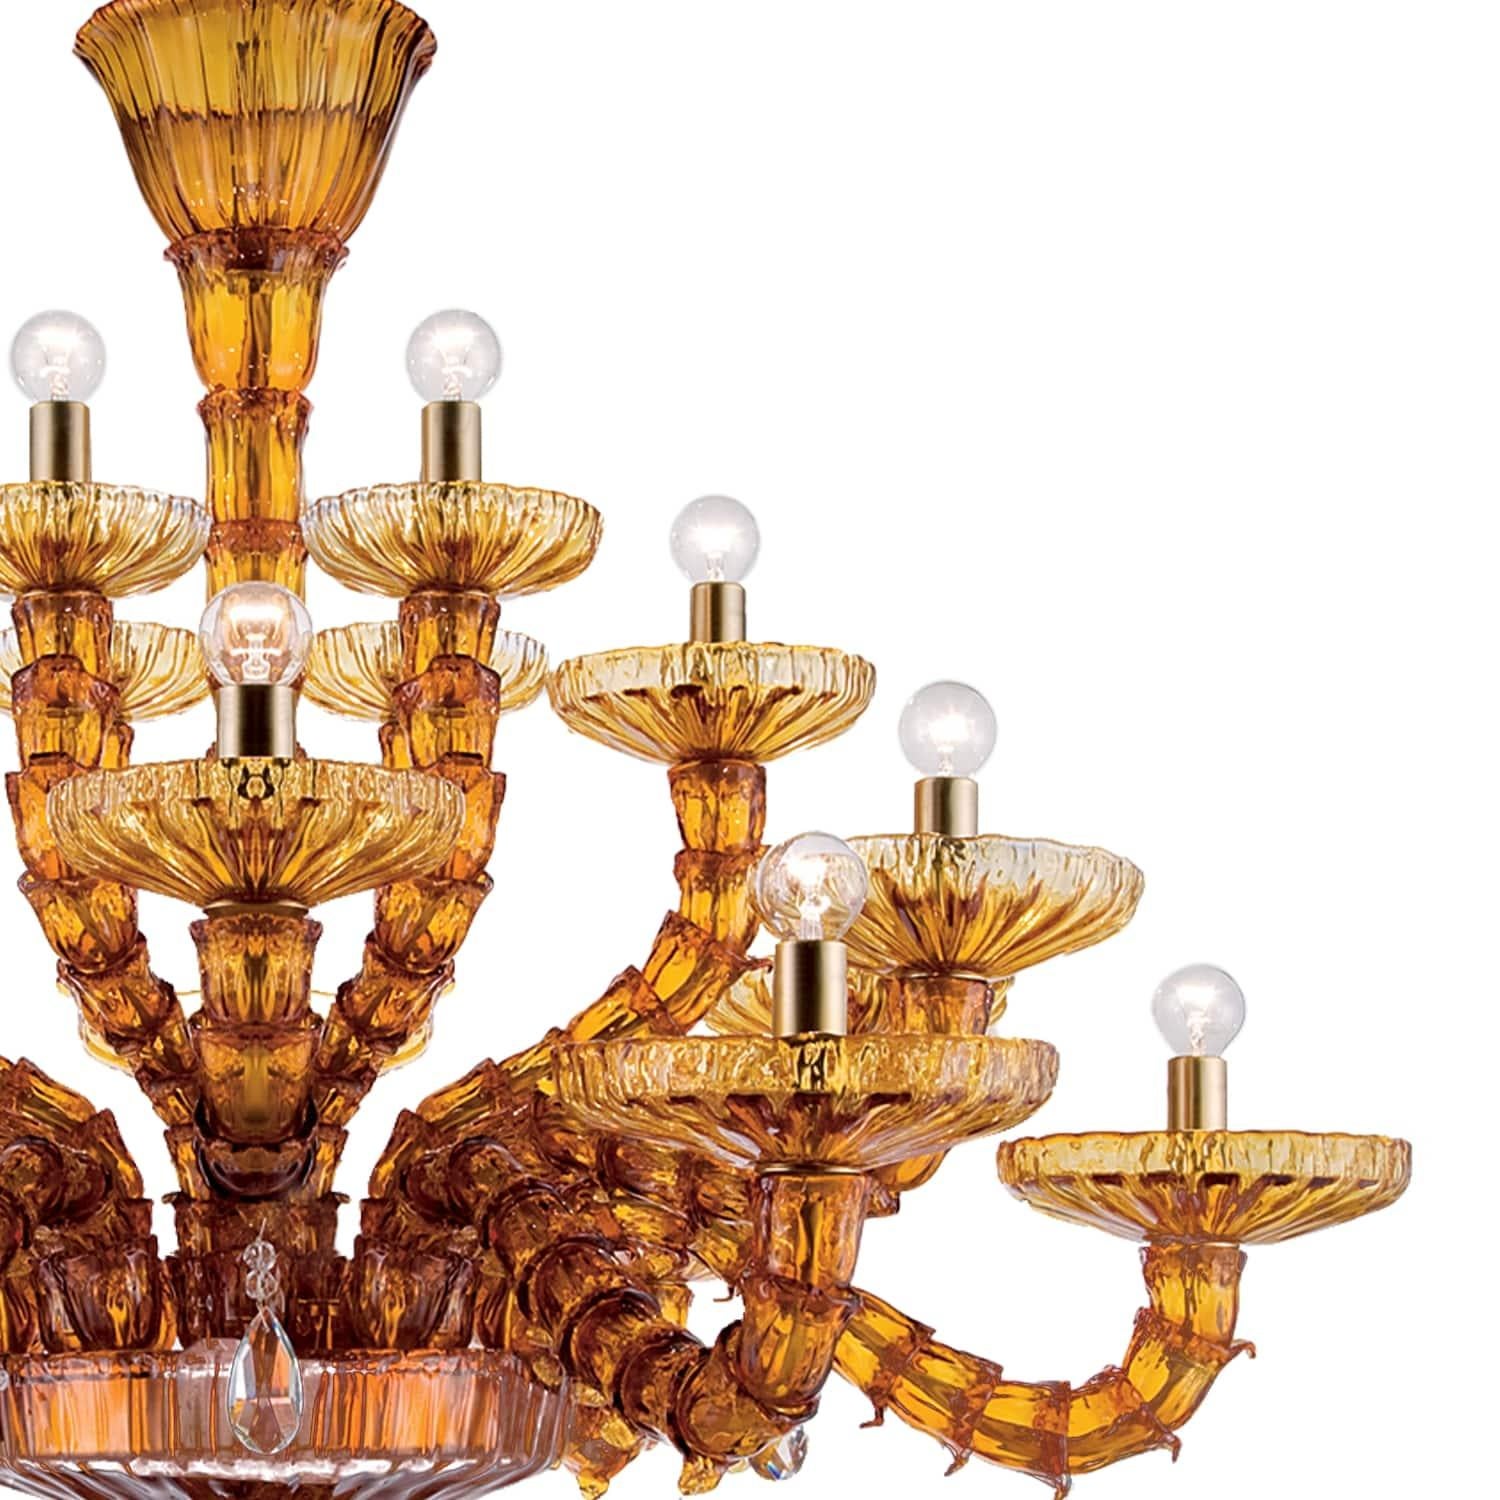 Artistic handmade Murano glass chandelier glamour by La Murrina, blowed in our furnace in Murano - Venice following the ancient glassmaster's art.

Additional information:
- Material: Murano glass
- Hardware finishing: Gold plated 
-